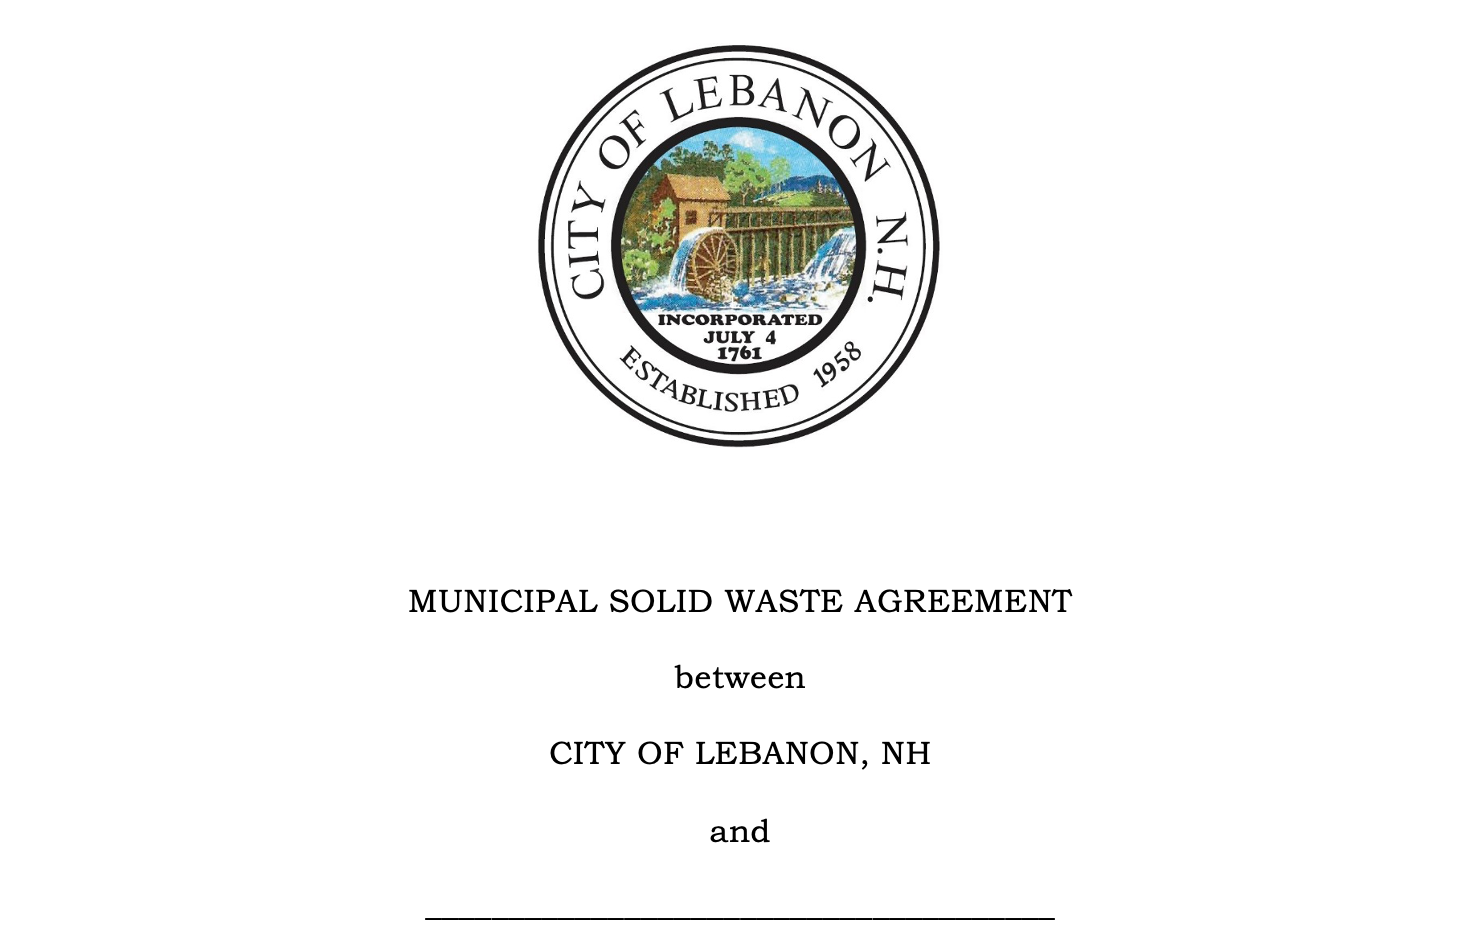 Lebanon asks Towns to sign new landfill agreement